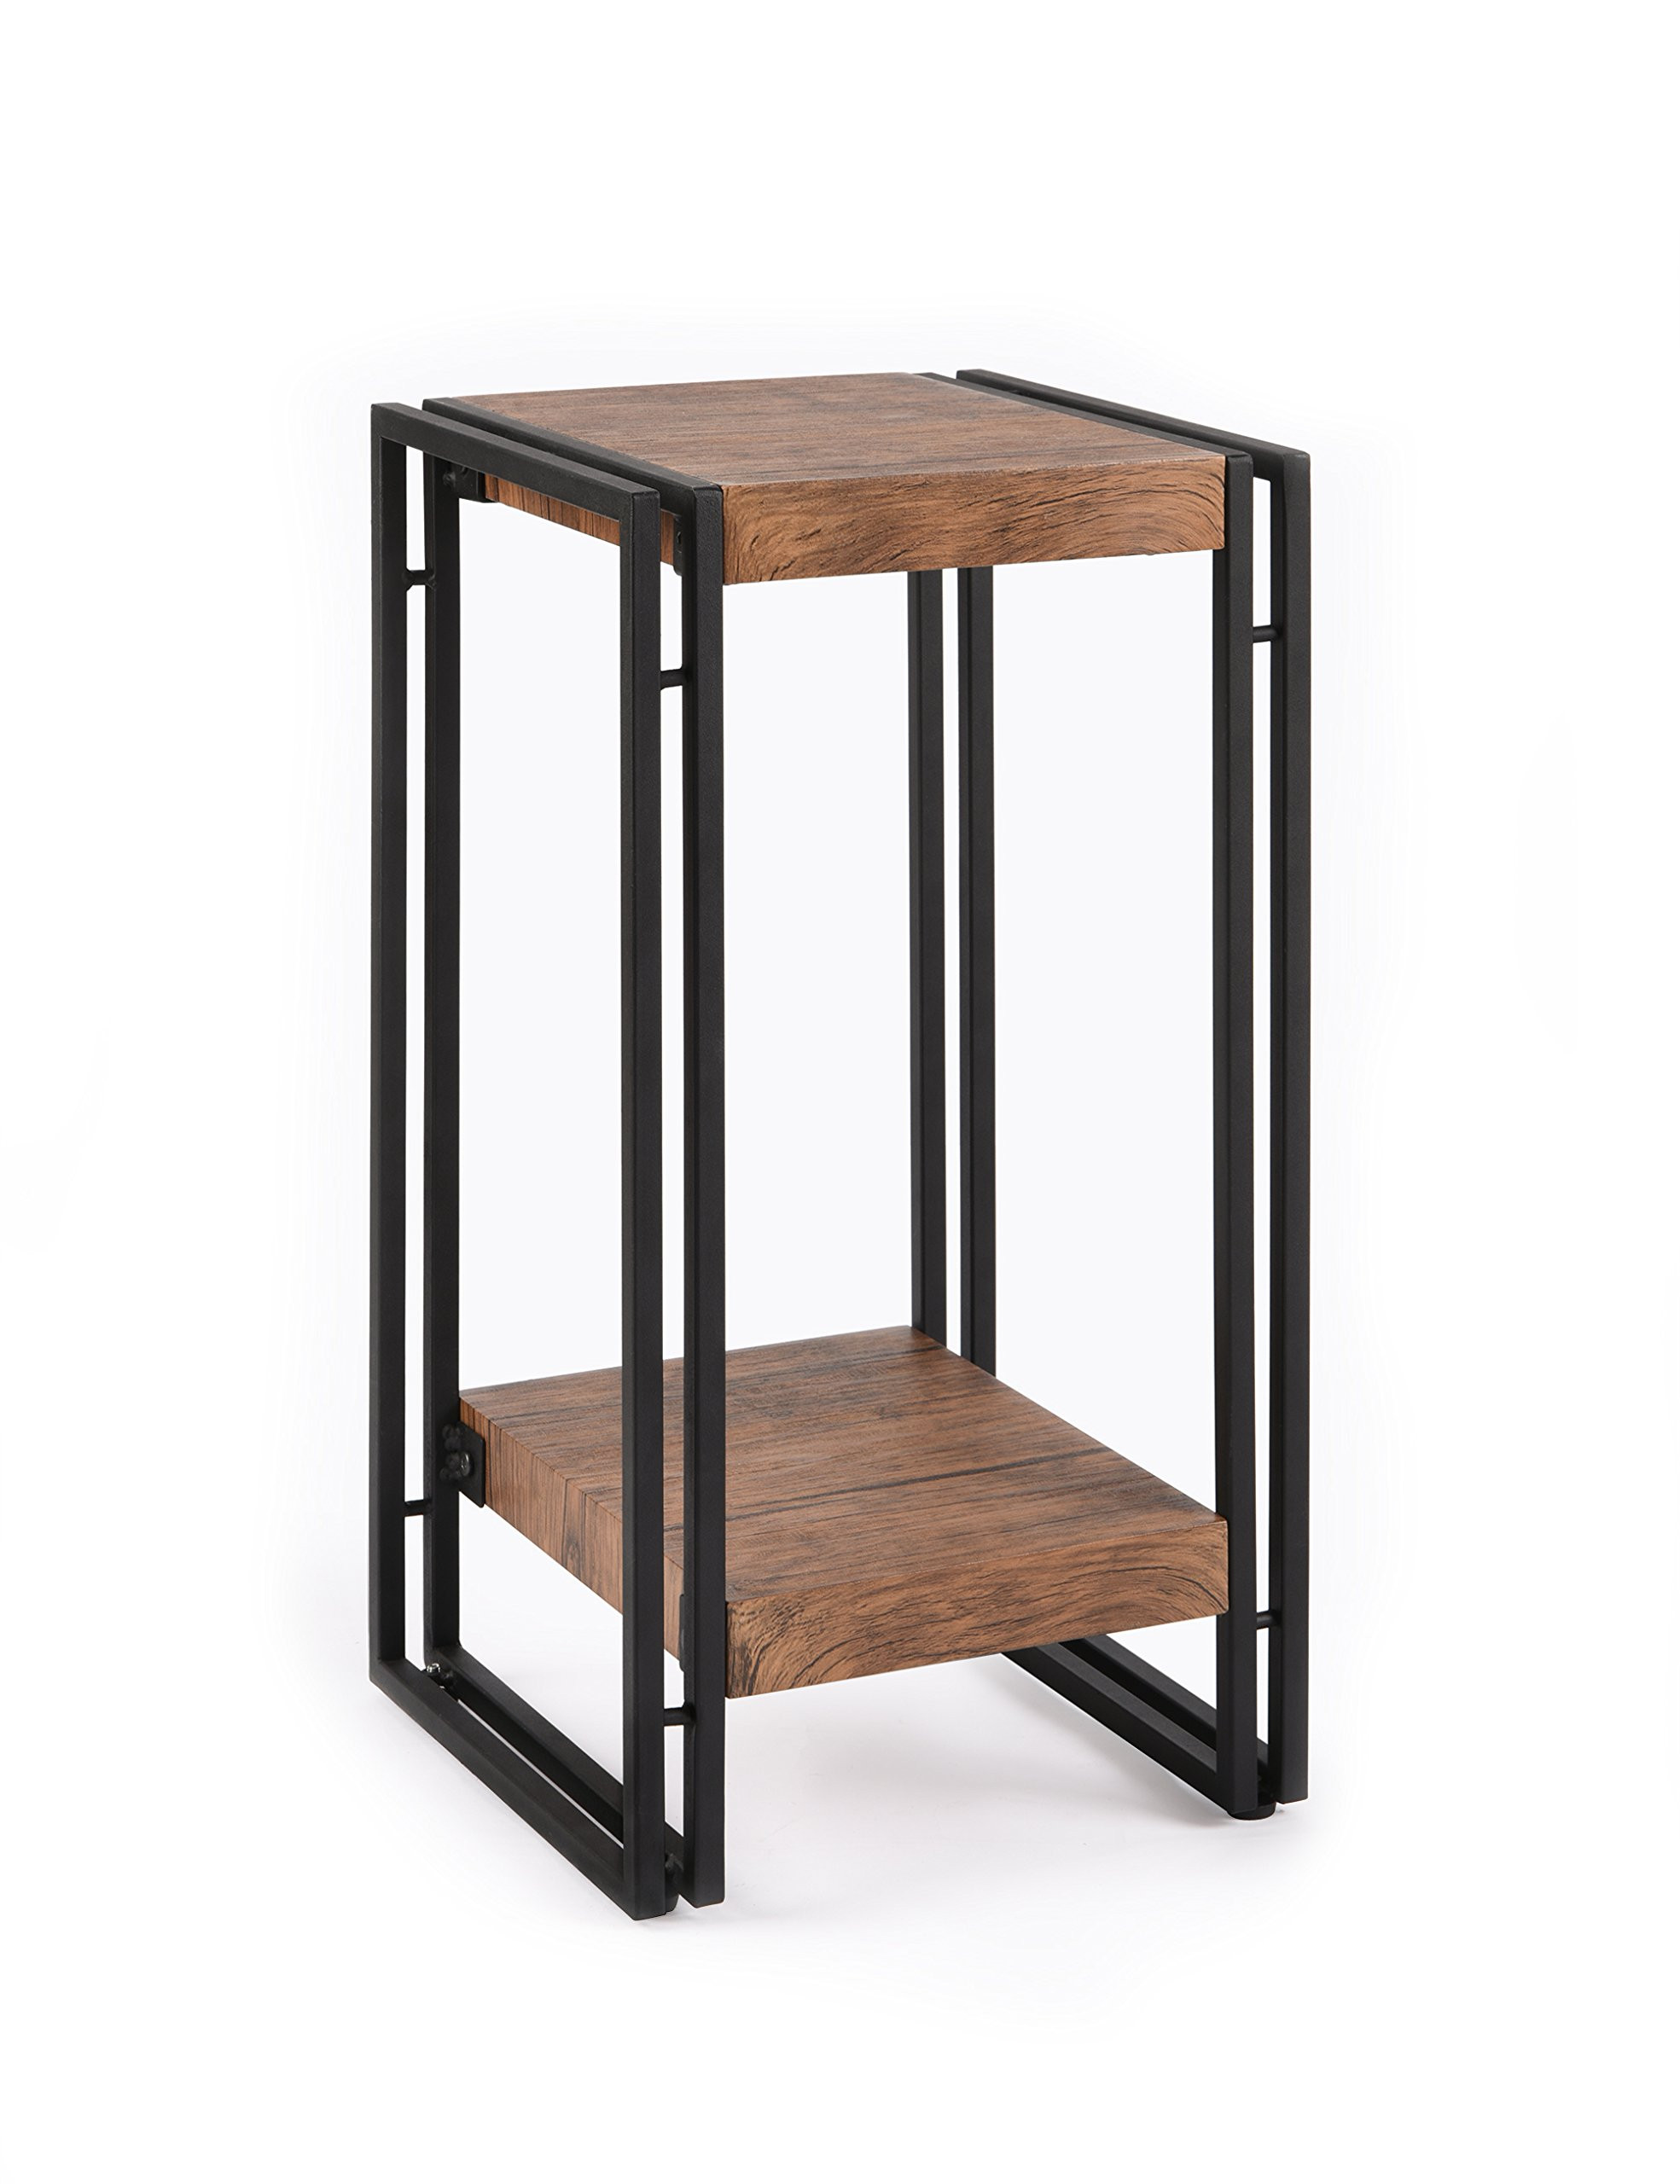 Small Bedroom End Tables
 FIVEGIVEN Accent Side Table for Small Spaces End Table for